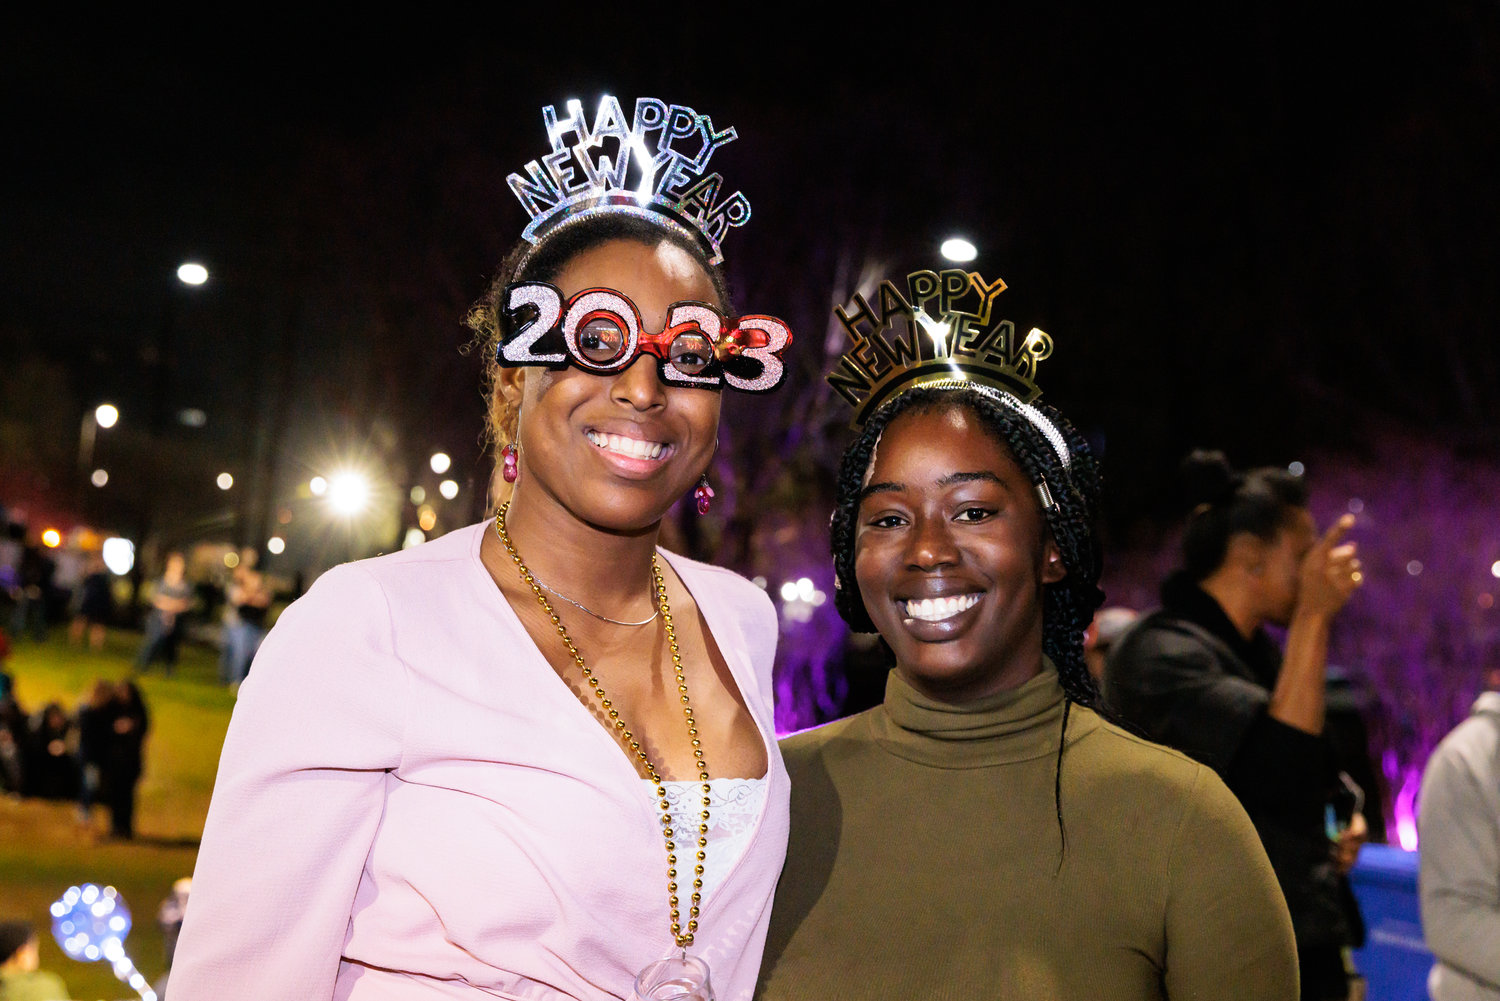 Yasmin Boone and Naquiah Boone were among those welcoming 2023 at Night Circus: A District New Year’s Eve Spectacular in Festival Park on Saturday.